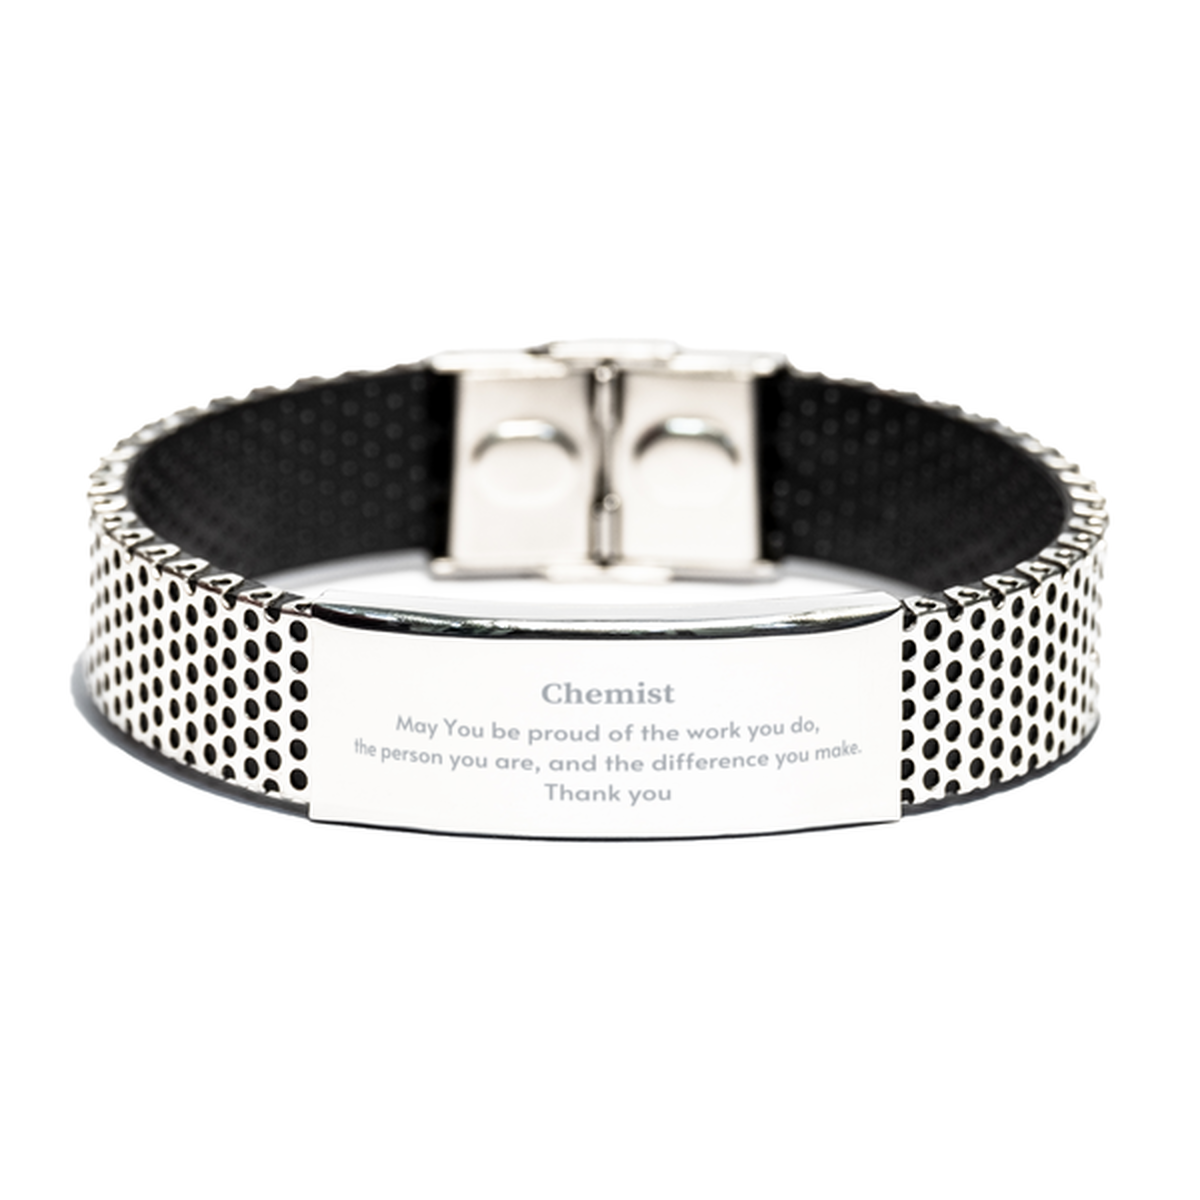 Heartwarming Stainless Steel Bracelet Retirement Coworkers Gifts for Chemist, Chemist May You be proud of the work you do, the person you are Gifts for Boss Men Women Friends